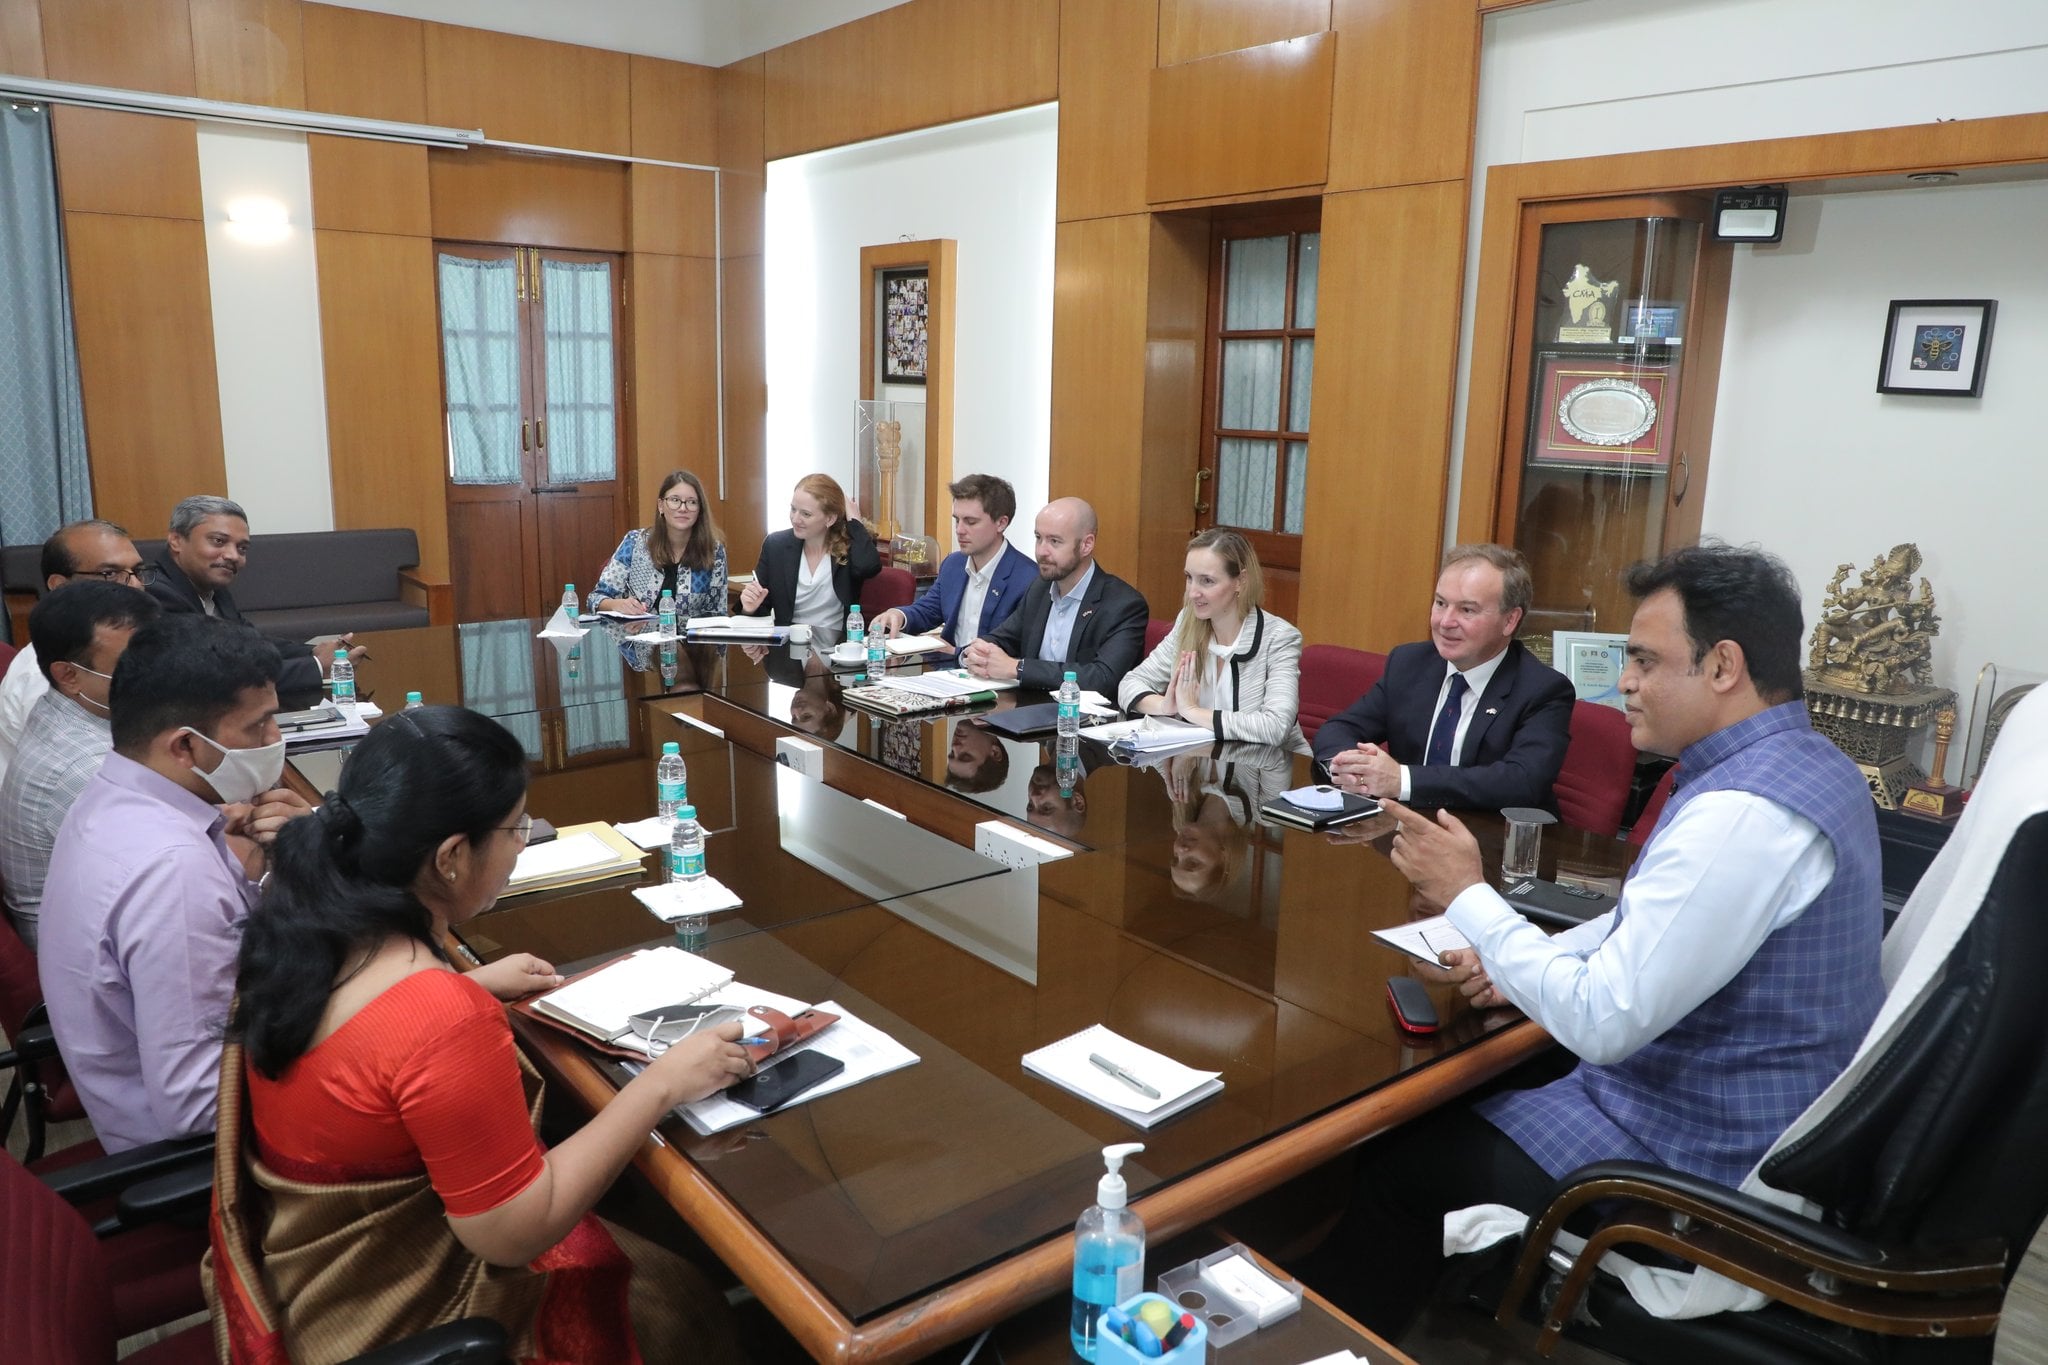 8. Delighted to have met British Deputy High Commissioner #JeremyPilmoreBedford, #KatyBudge, Minister Counsellor and other dignitaries at Bengaluru today. We discussed our engagements in tech, cybersecurity, Bengaluru Tech Summit and people-to-people connects. – (6 Oct)